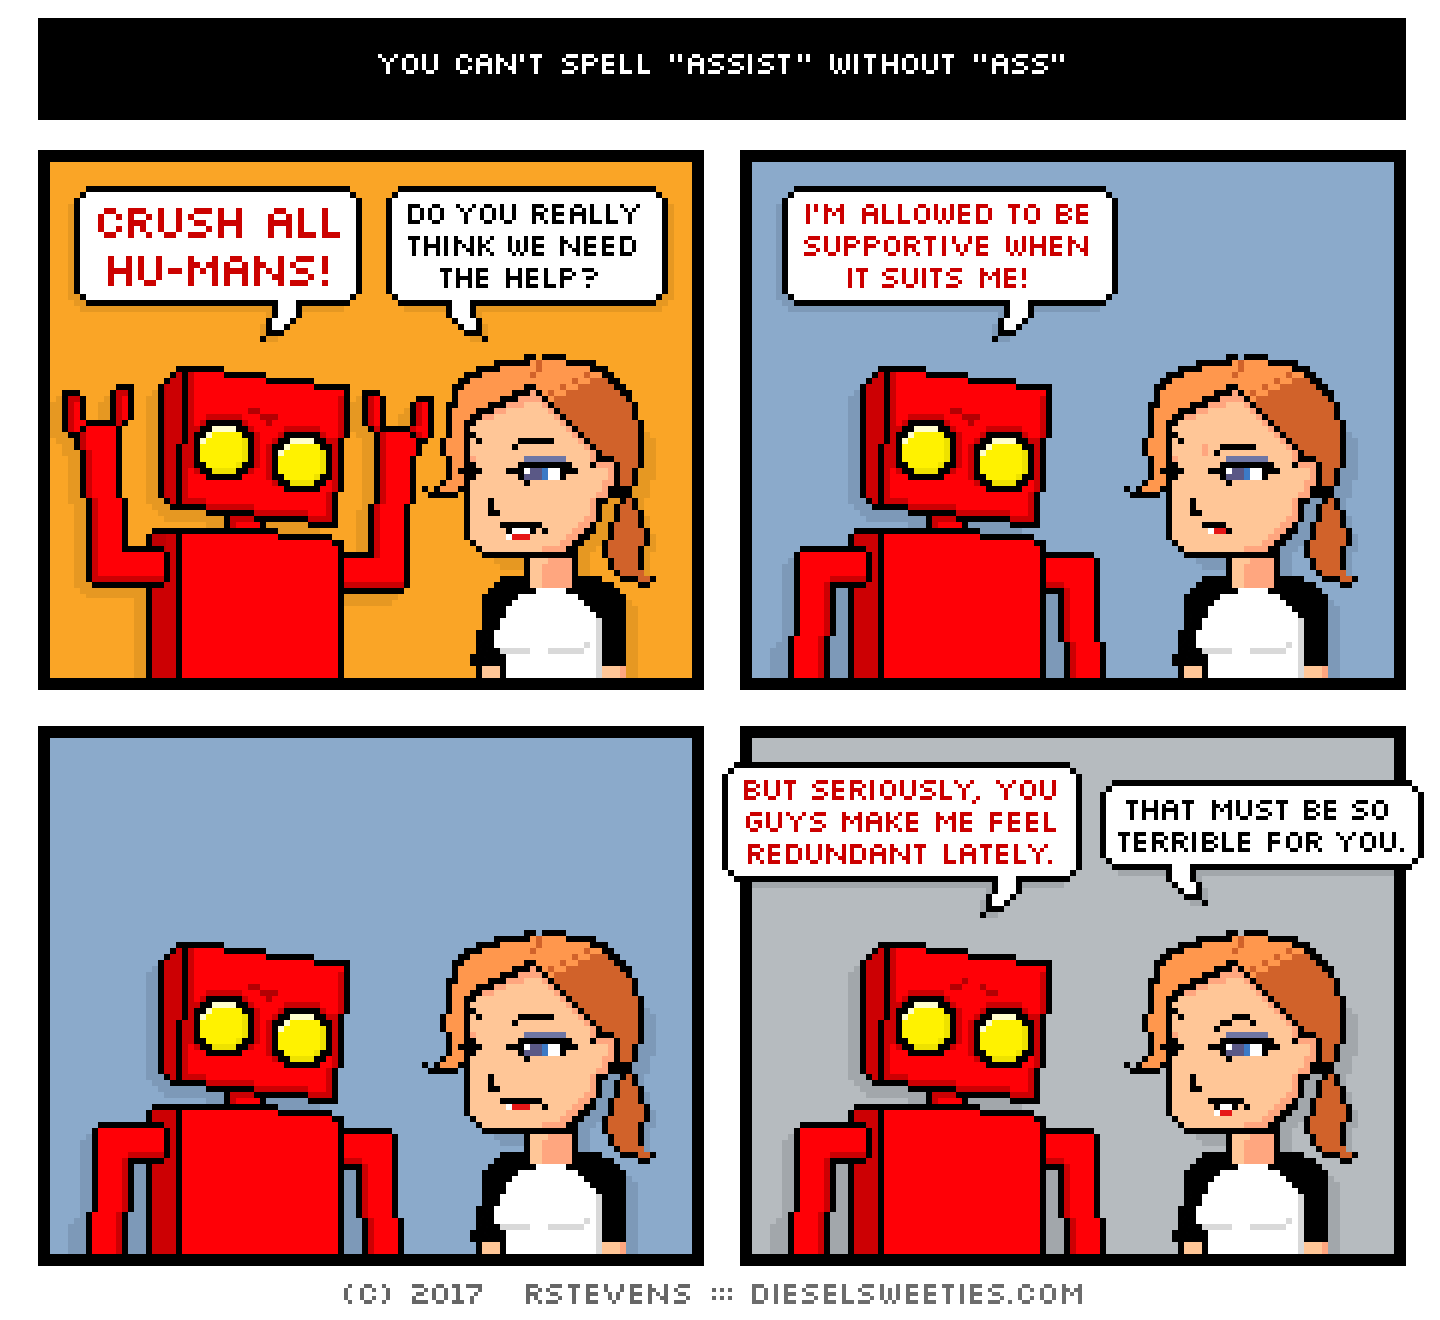 red robot, maura : CRUSH ALL HUMANS do you really think we need the help? i'm allowed to be supportive when it suits me! but seriously, you guys make me feel redundant lately. that must be so terrible for you.